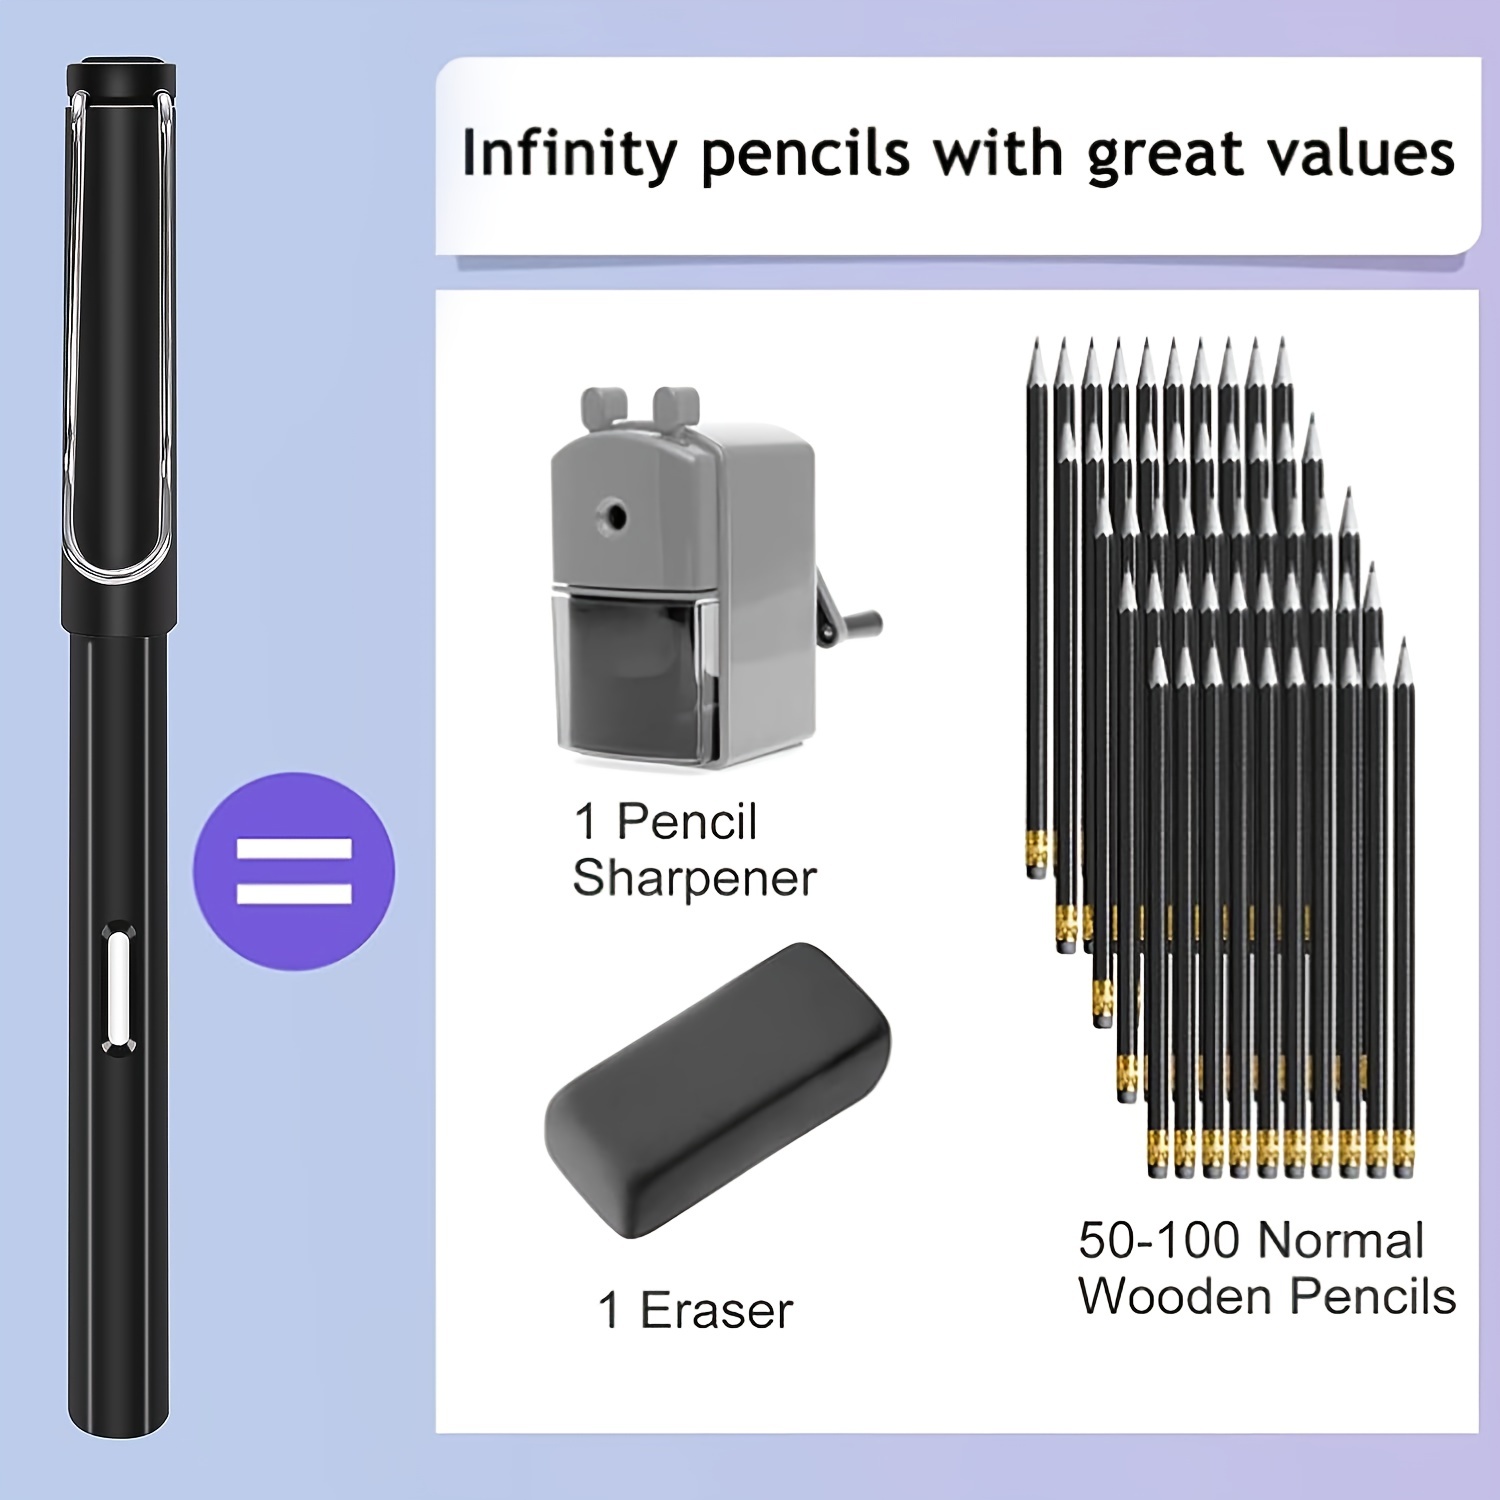 1pc No Sharpening Infinity Pencil With Eraser, No Ink Unlimited